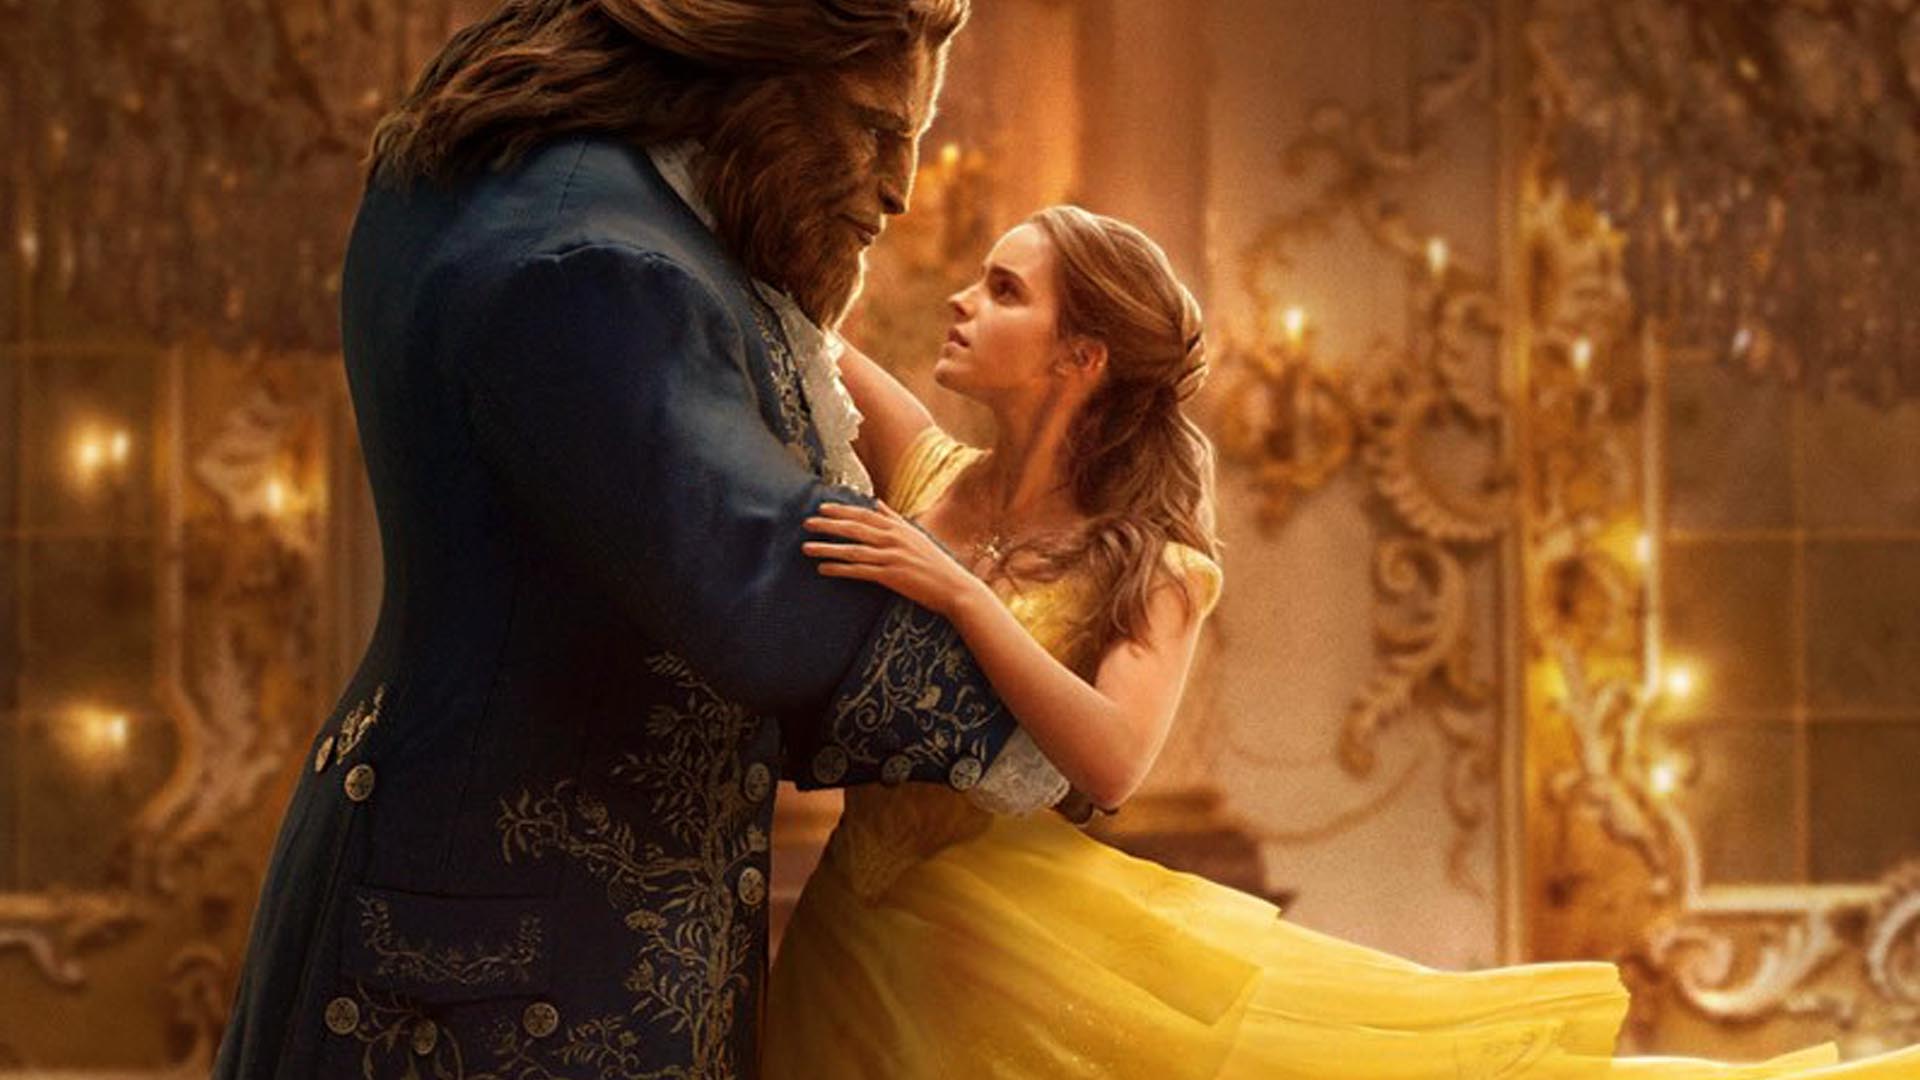 BEAUTY AND THE BEAST TRAILER SETS A NEW RECORD!